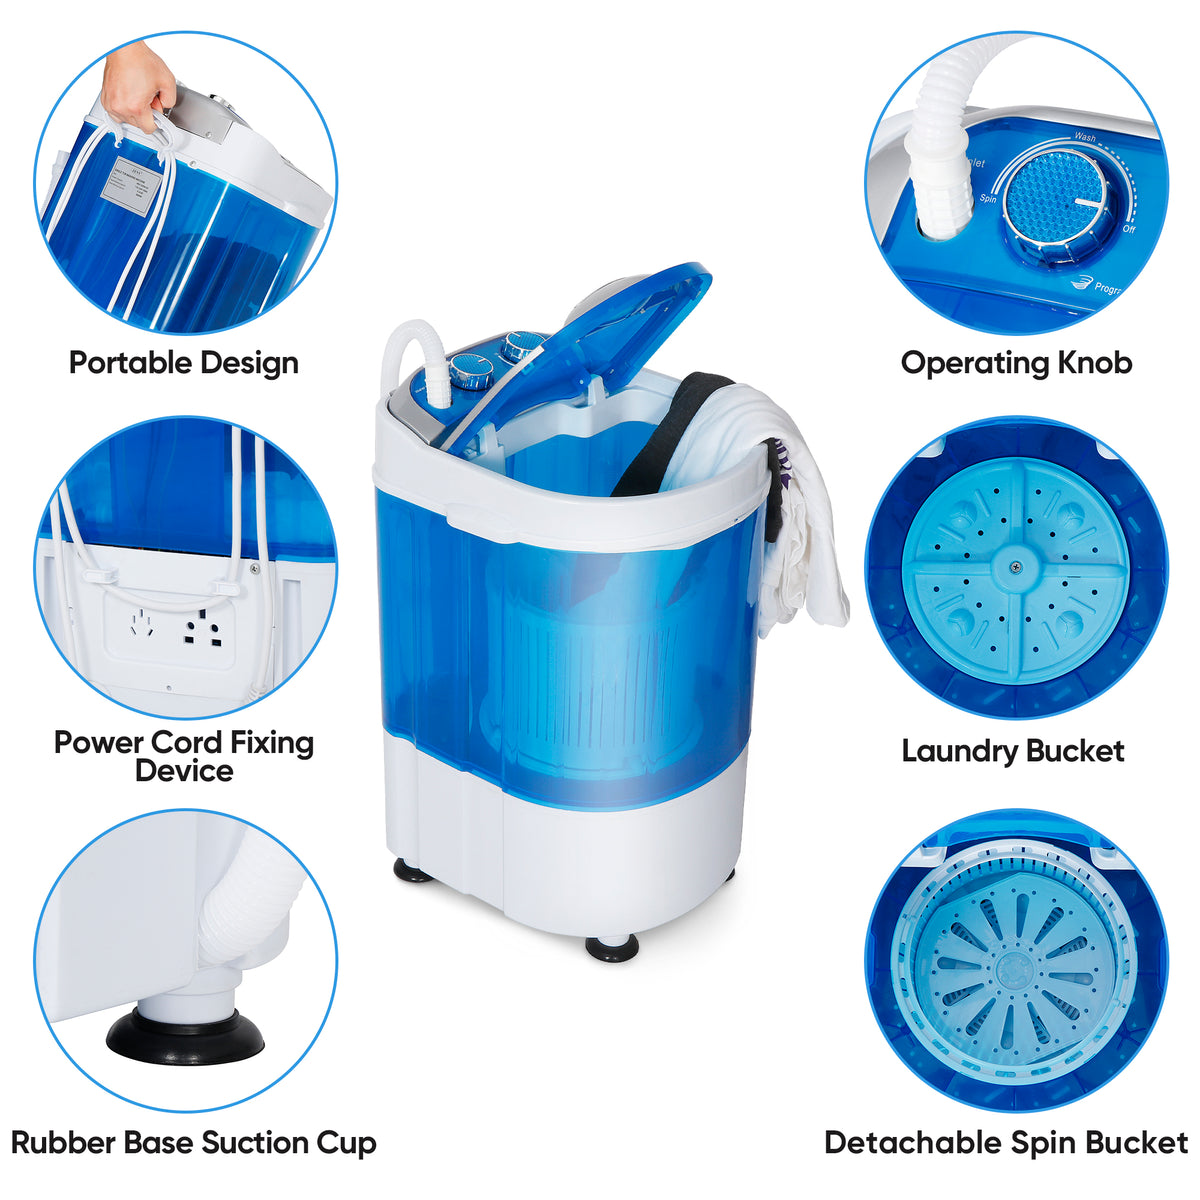 ZENY™ Mini Washer 5.7 lbs Capacity Portable Single Tub Compact Washing  Machine with Spin Cycle Basket and Drain Hose,RVs 110V